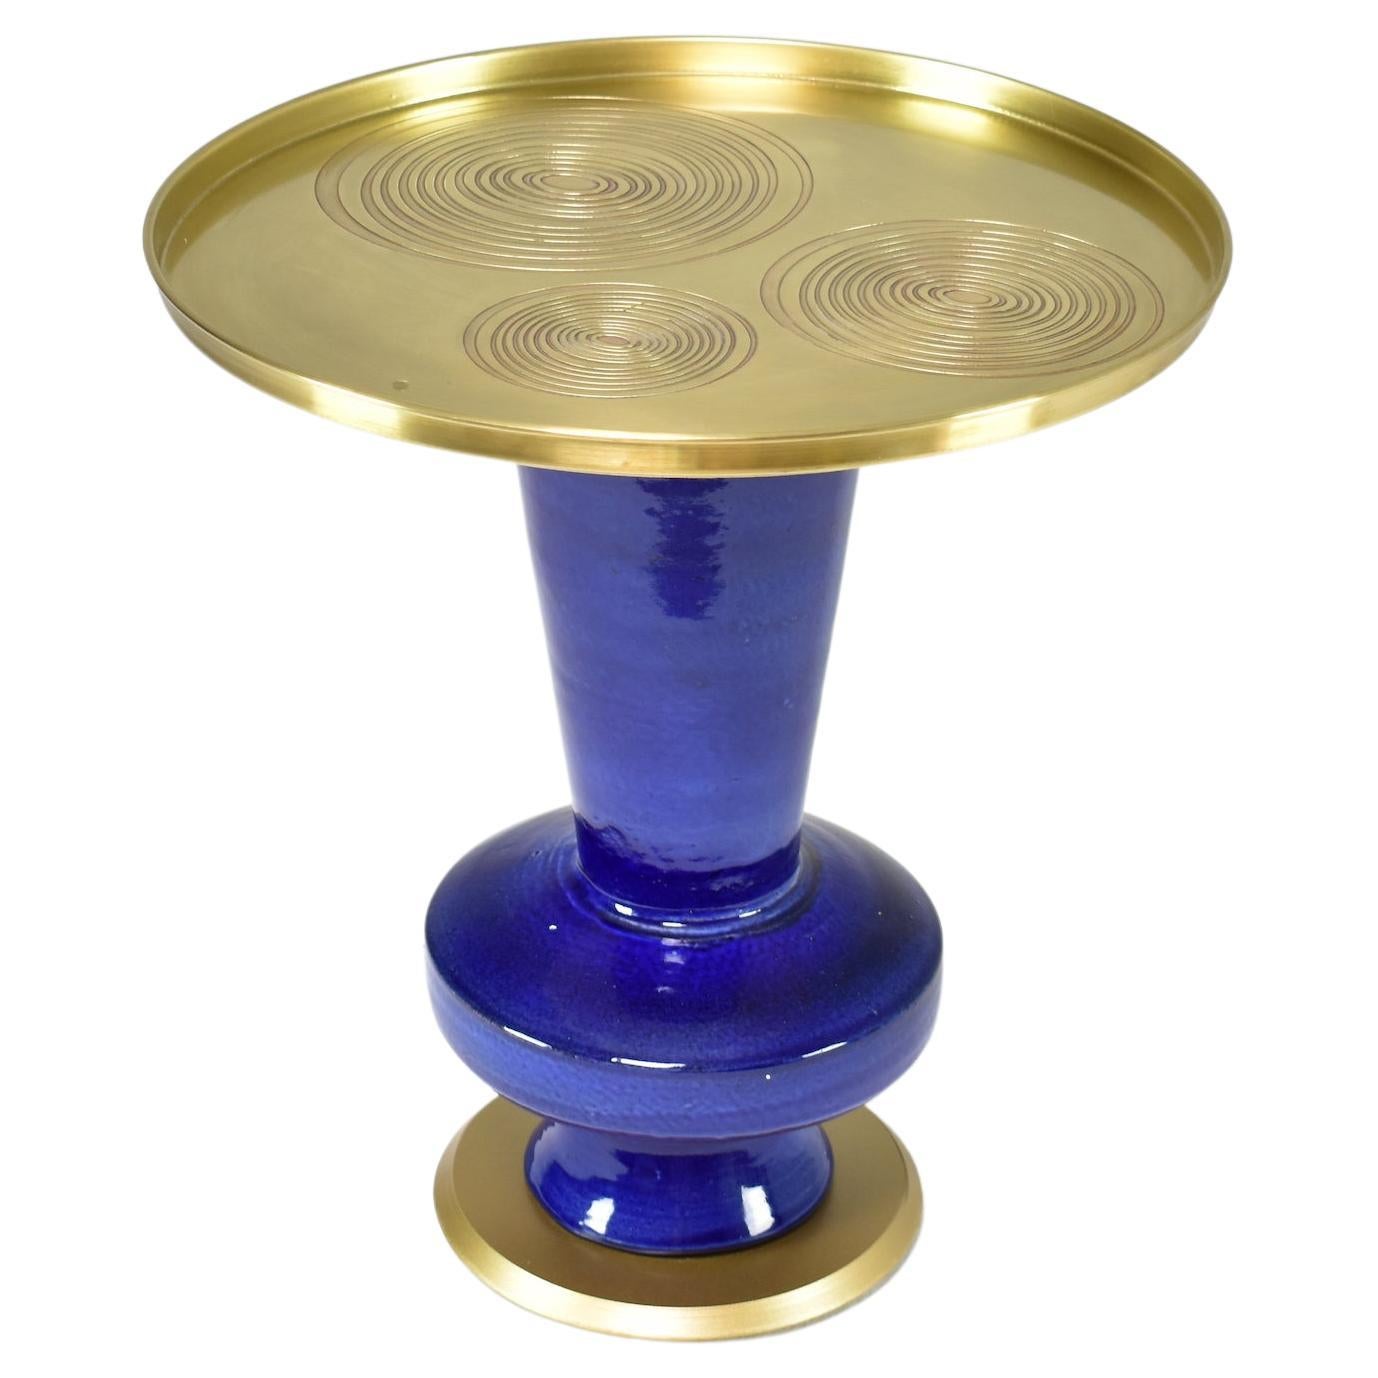  Contemporary Brass and Ceramic Side Table by JAS 